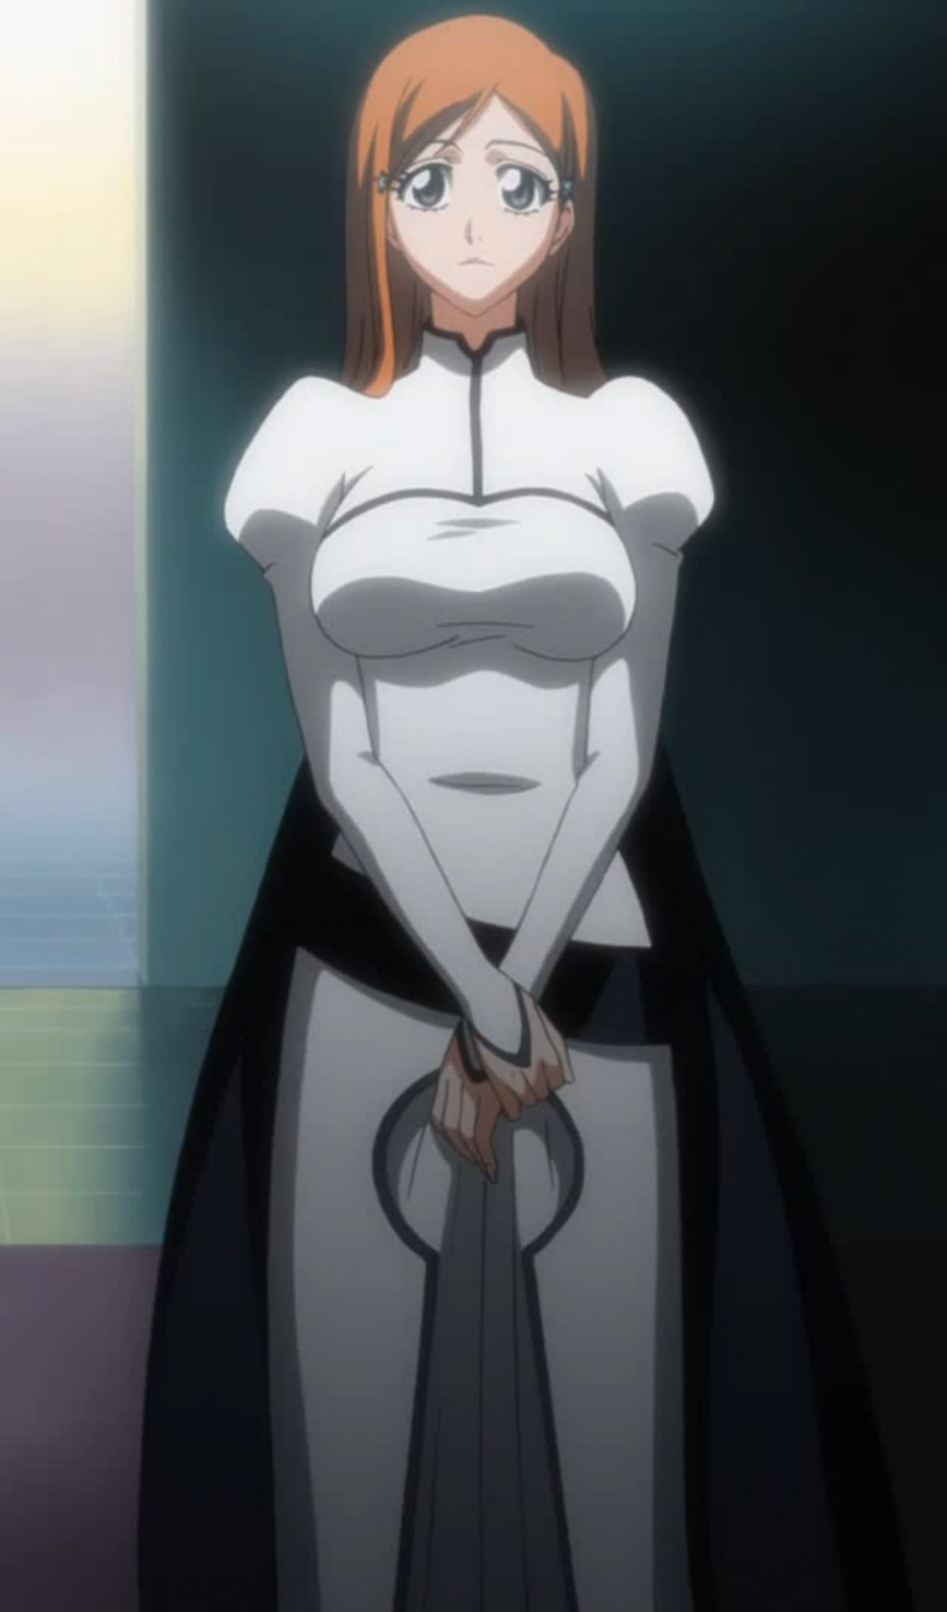 How does Orihime live alone if she doesn't have a job to pay for